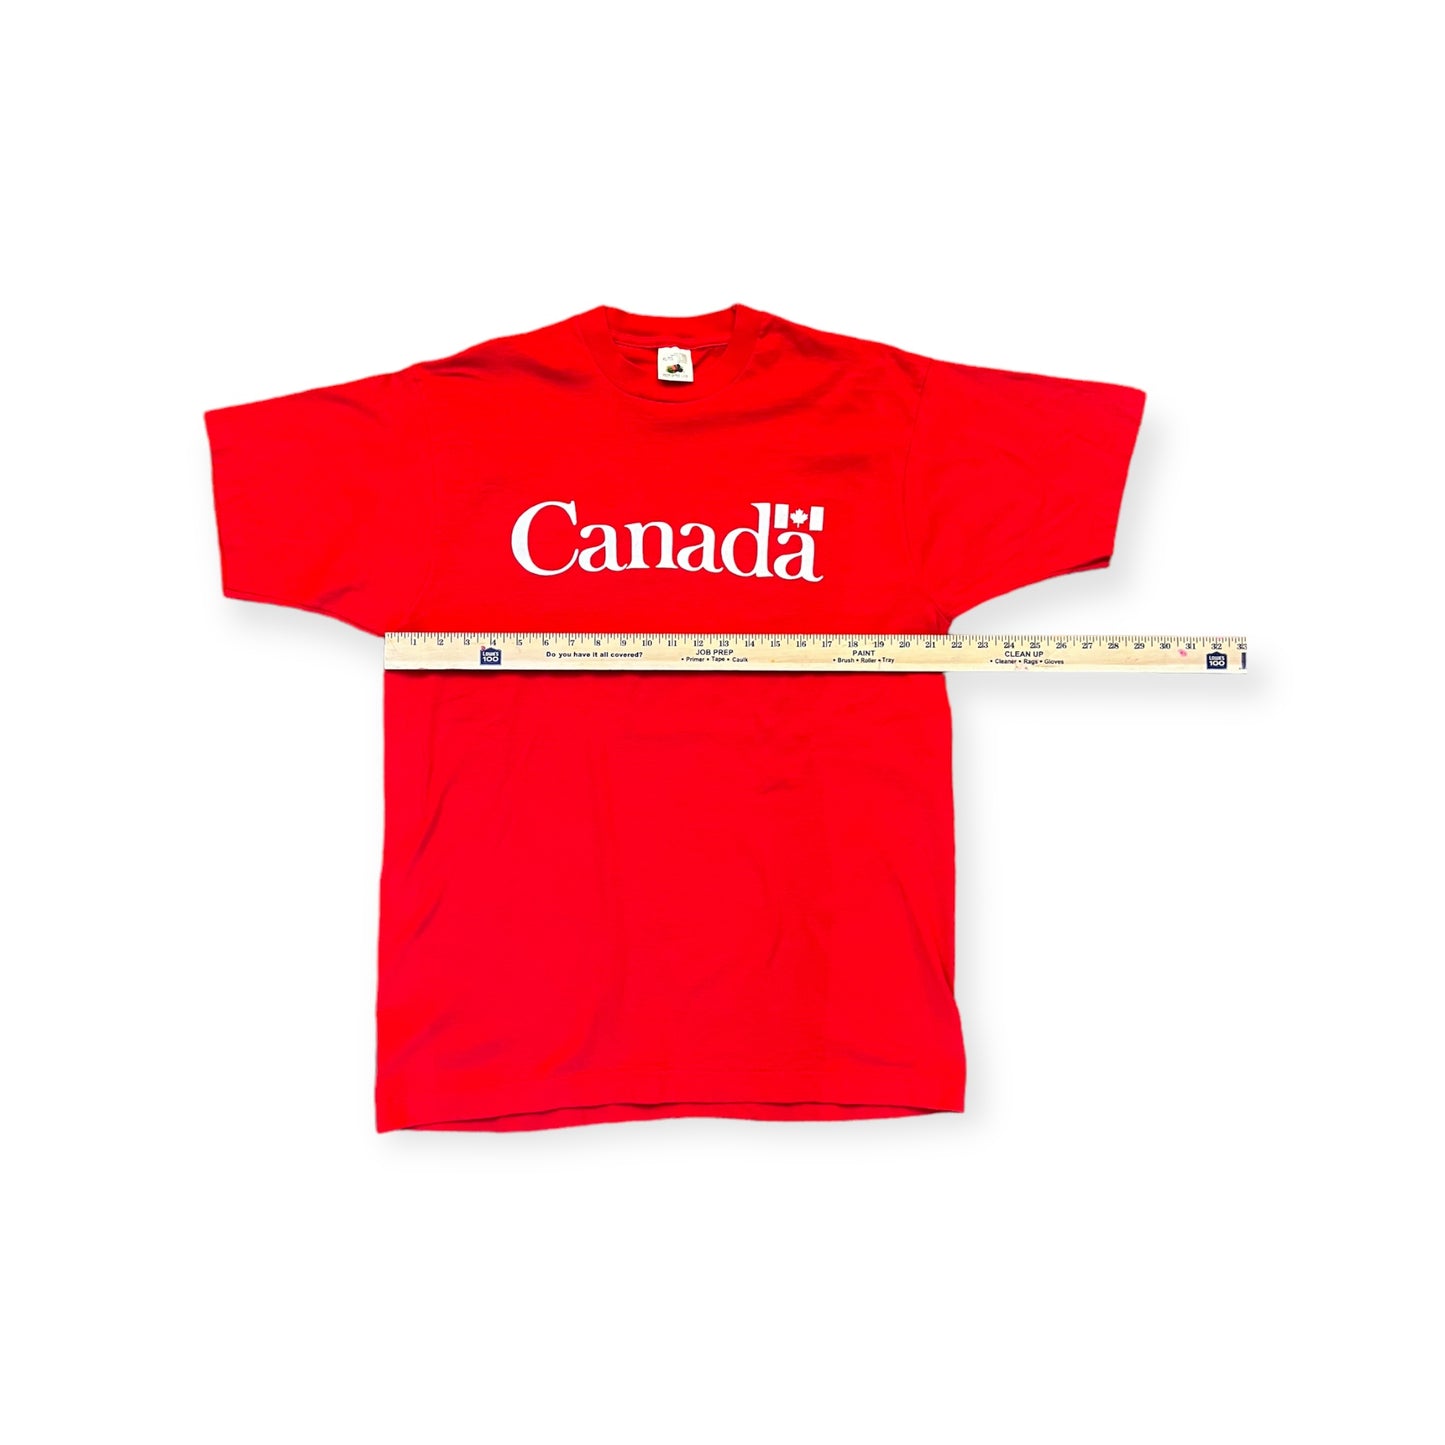 Vintage Canada "Made in Canada" Tee - XL